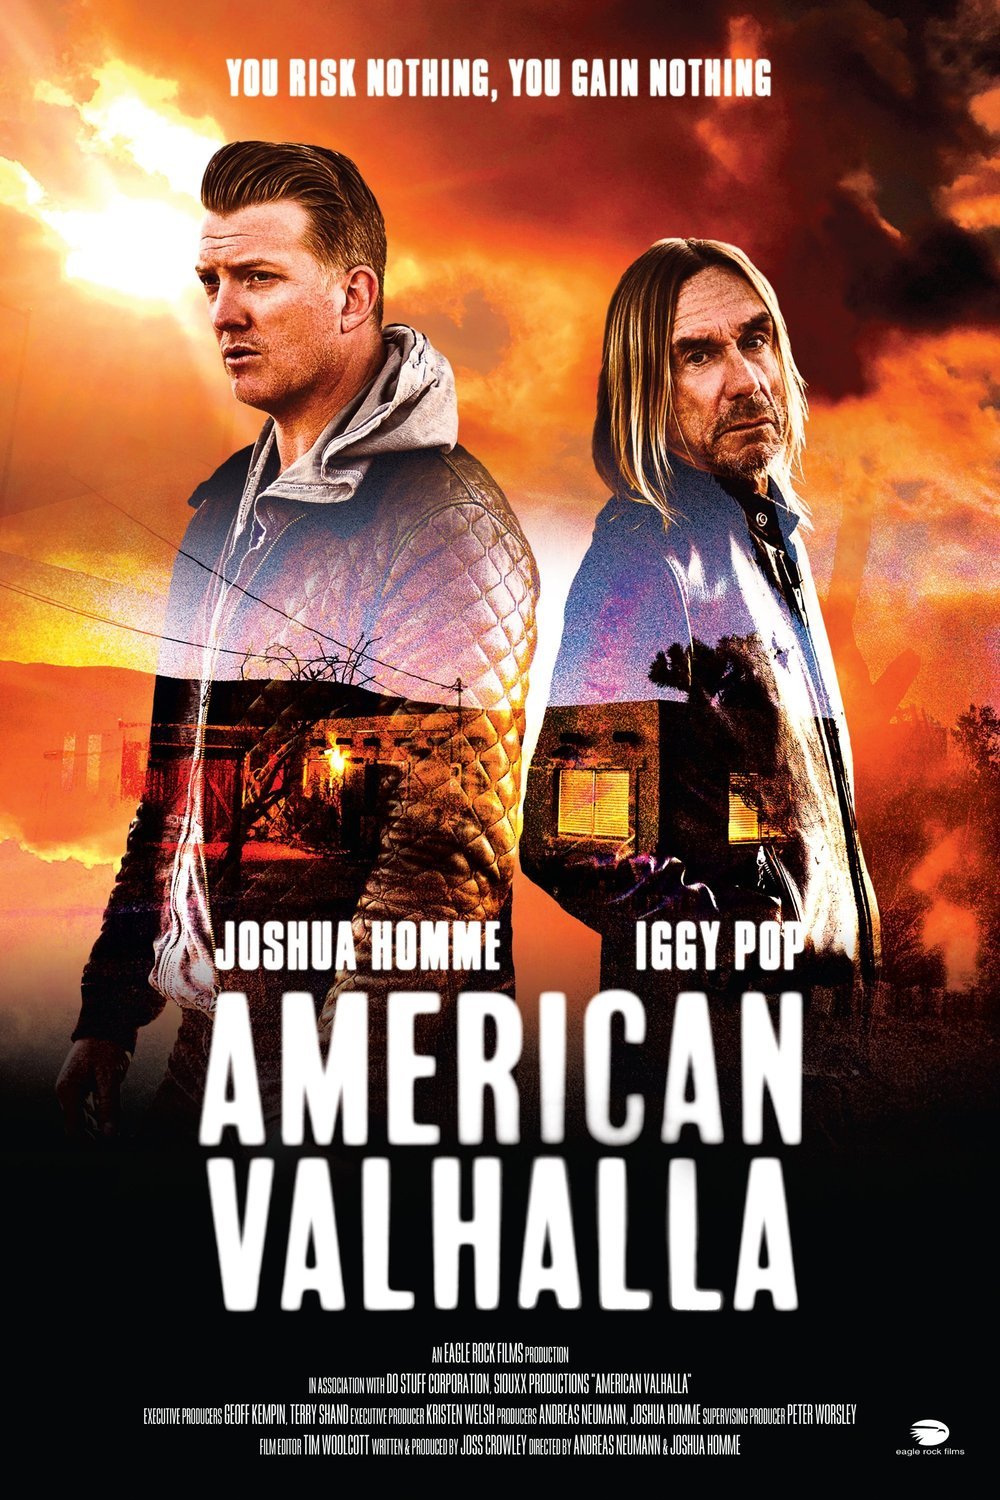 Poster of the movie American Valhalla